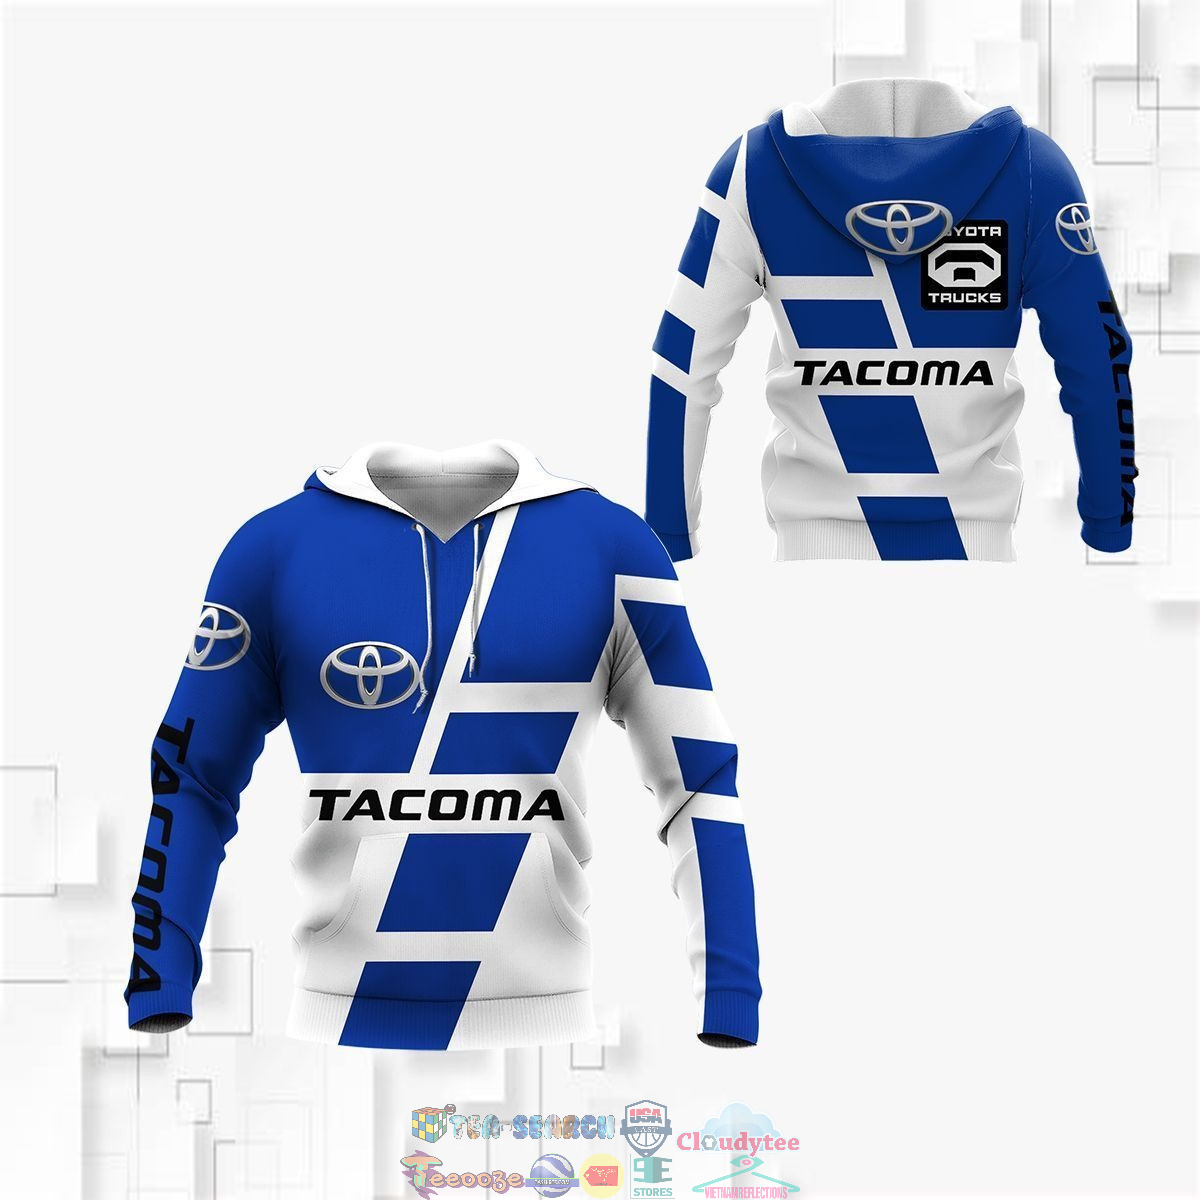 Toyota Tacoma ver 12 3D hoodie and t-shirt